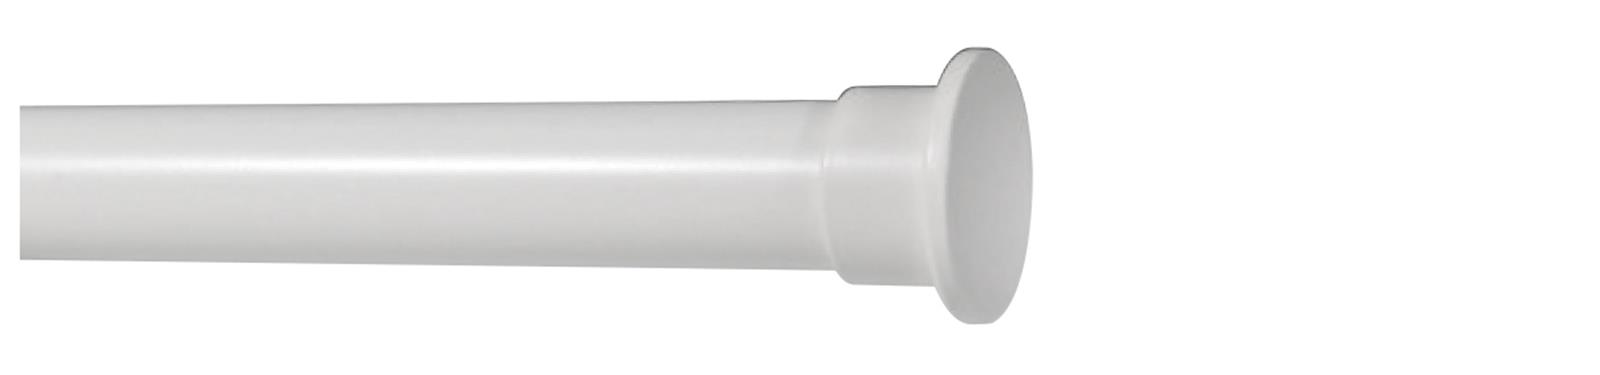 Cameron Fuller 32mm Metal Curtain Pole Oyster Stopper